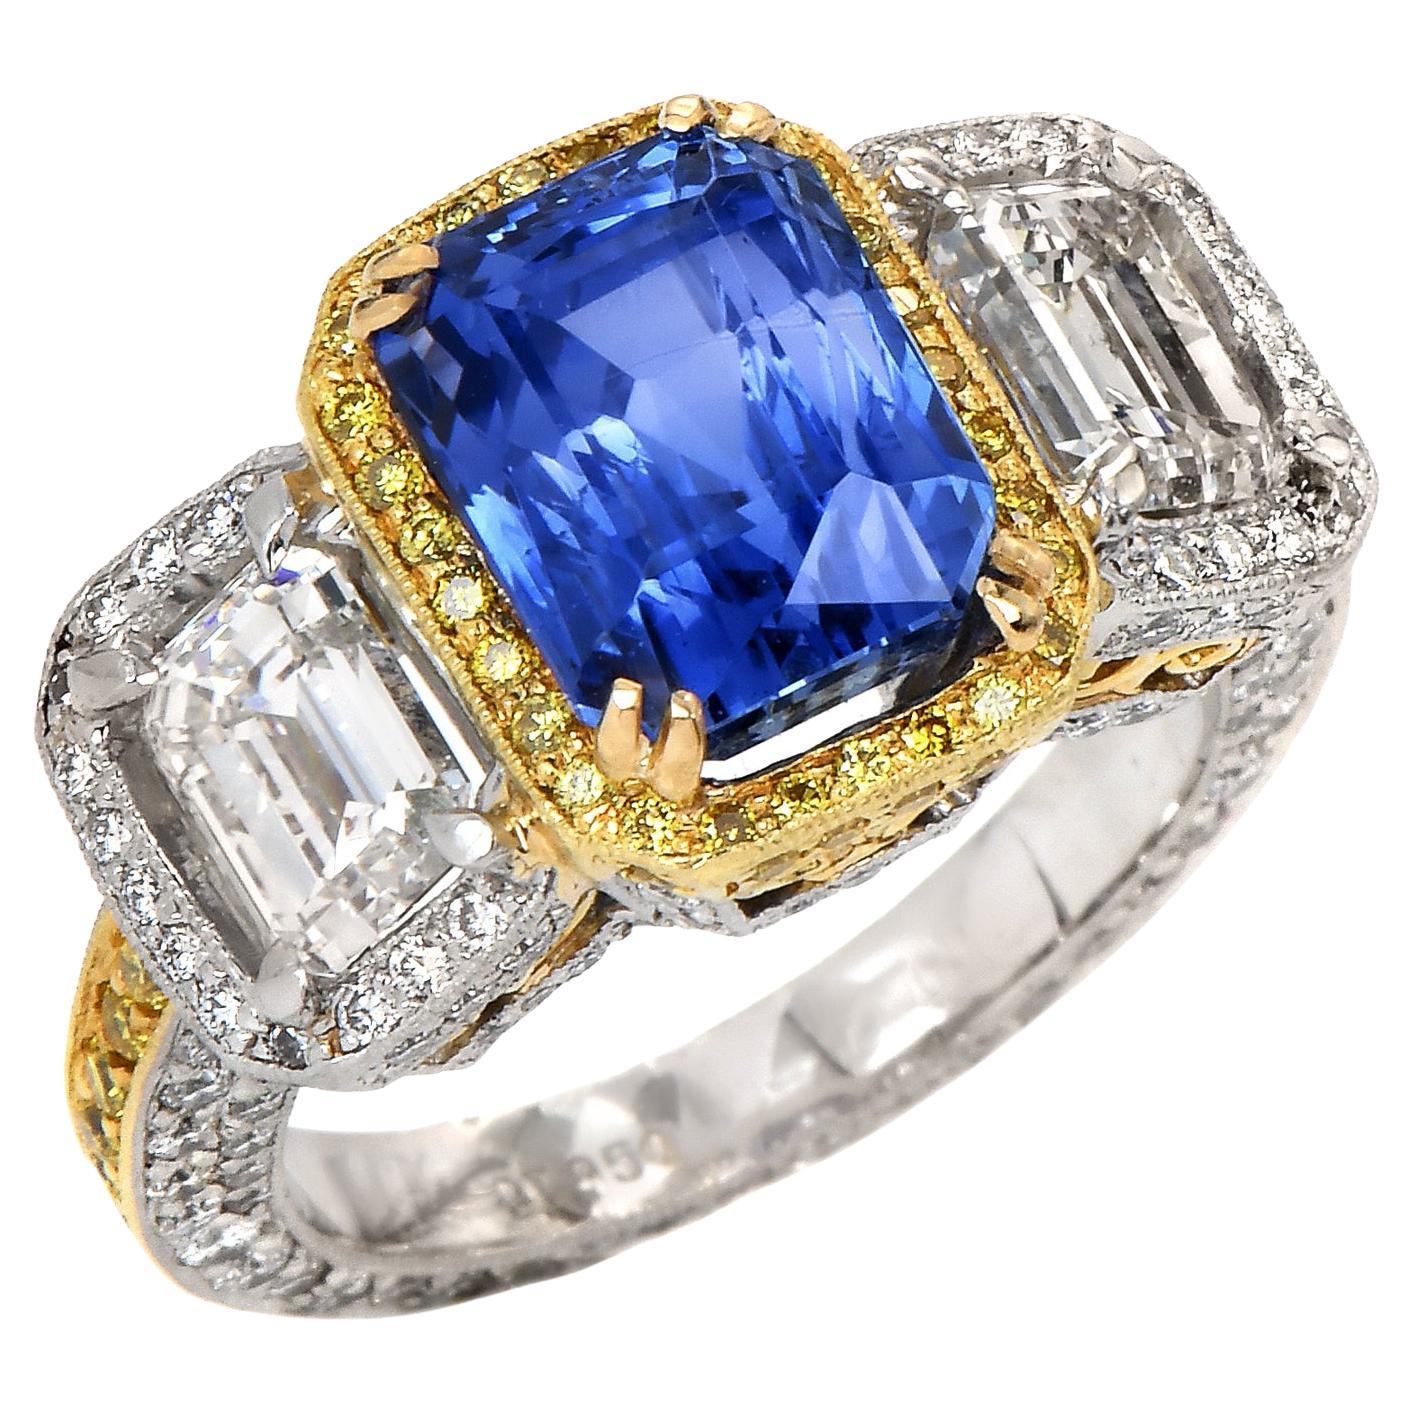 This stunning three-stone diamond ring from the 21st Century is crafted in solid platinum and 18k gold. Showcasing in the center with one Octagonal Modified brilliant step cut Ceylon no-heat Royal blue Sapphire weighing approx. 5.06 carats,